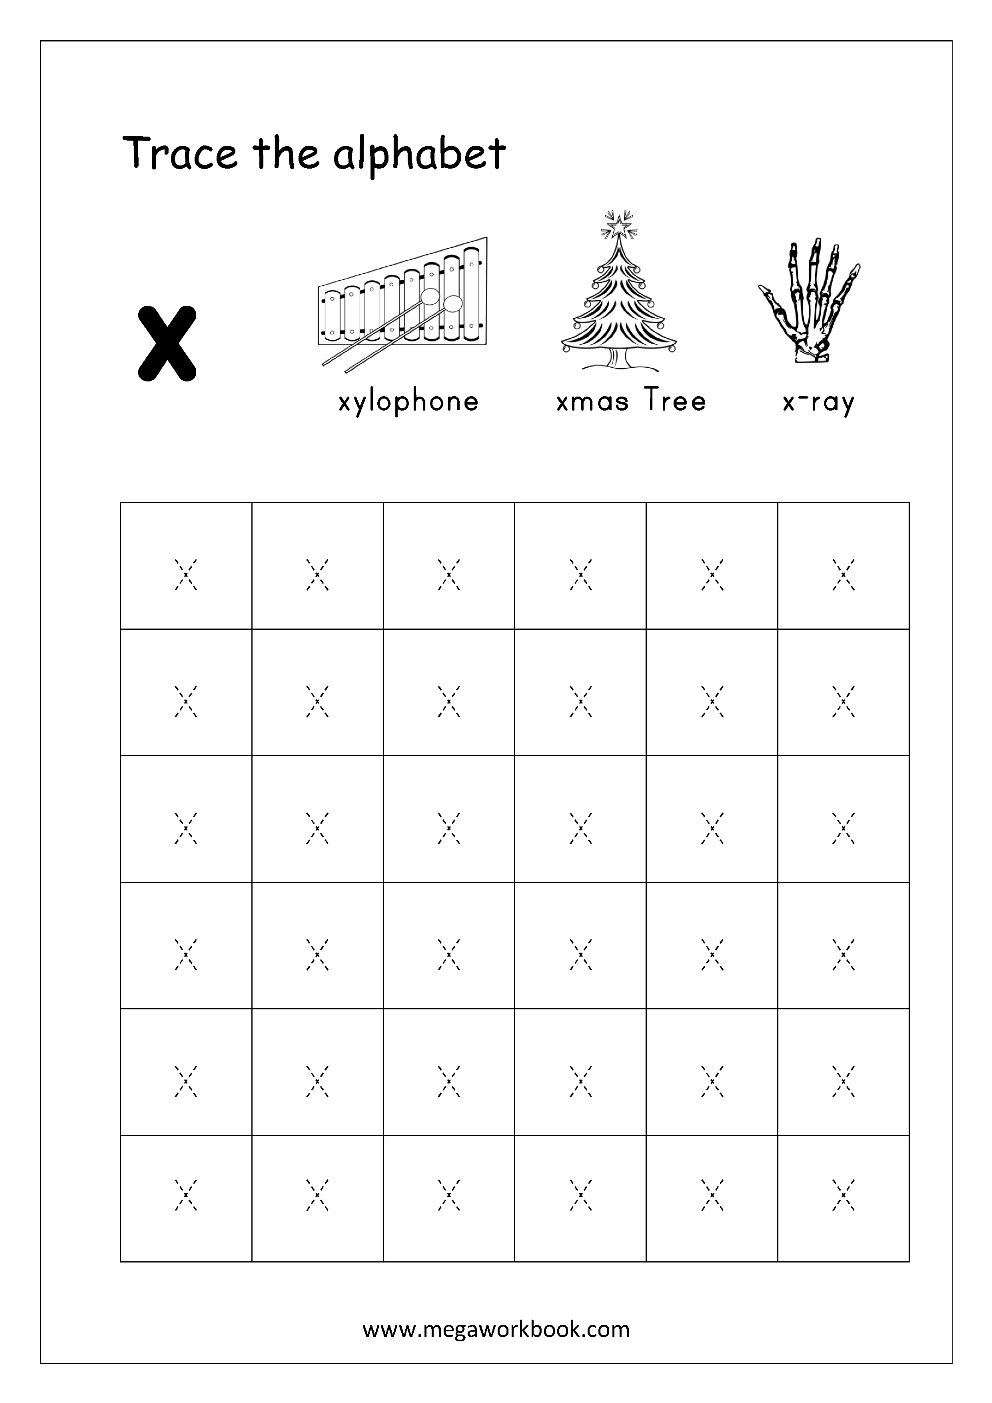 Free English Worksheets - Alphabet Tracing (Small Letters pertaining to Alphabet Tracing Lowercase Letters